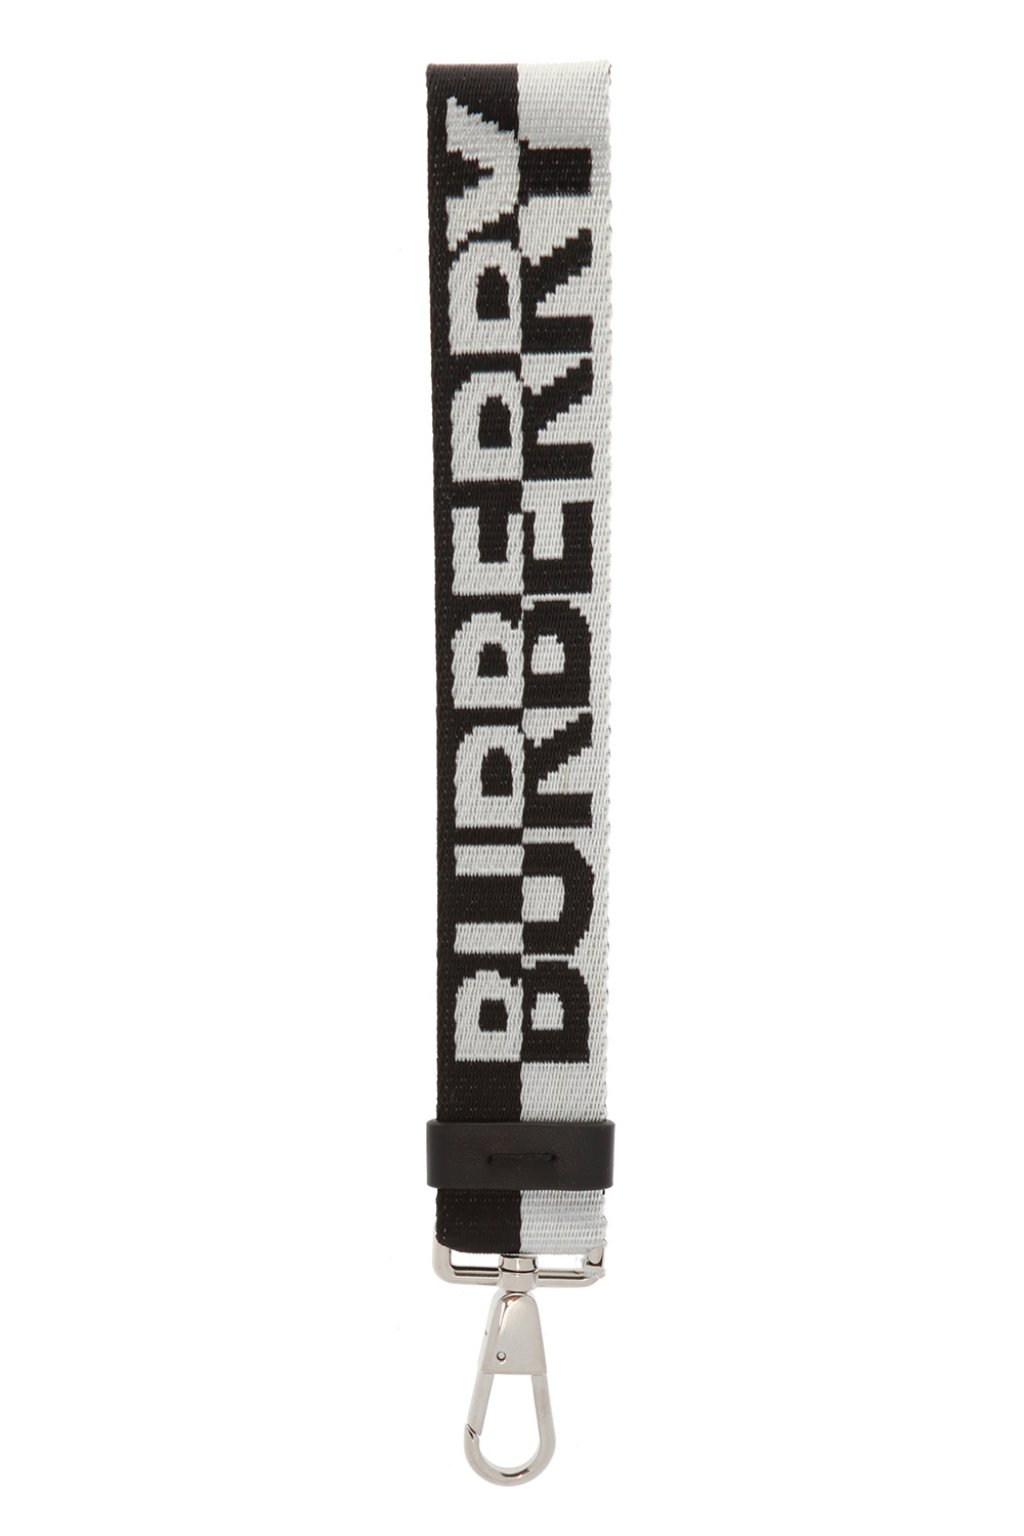 Burberry Lanyard with lobster clasp, Men's Accessorie